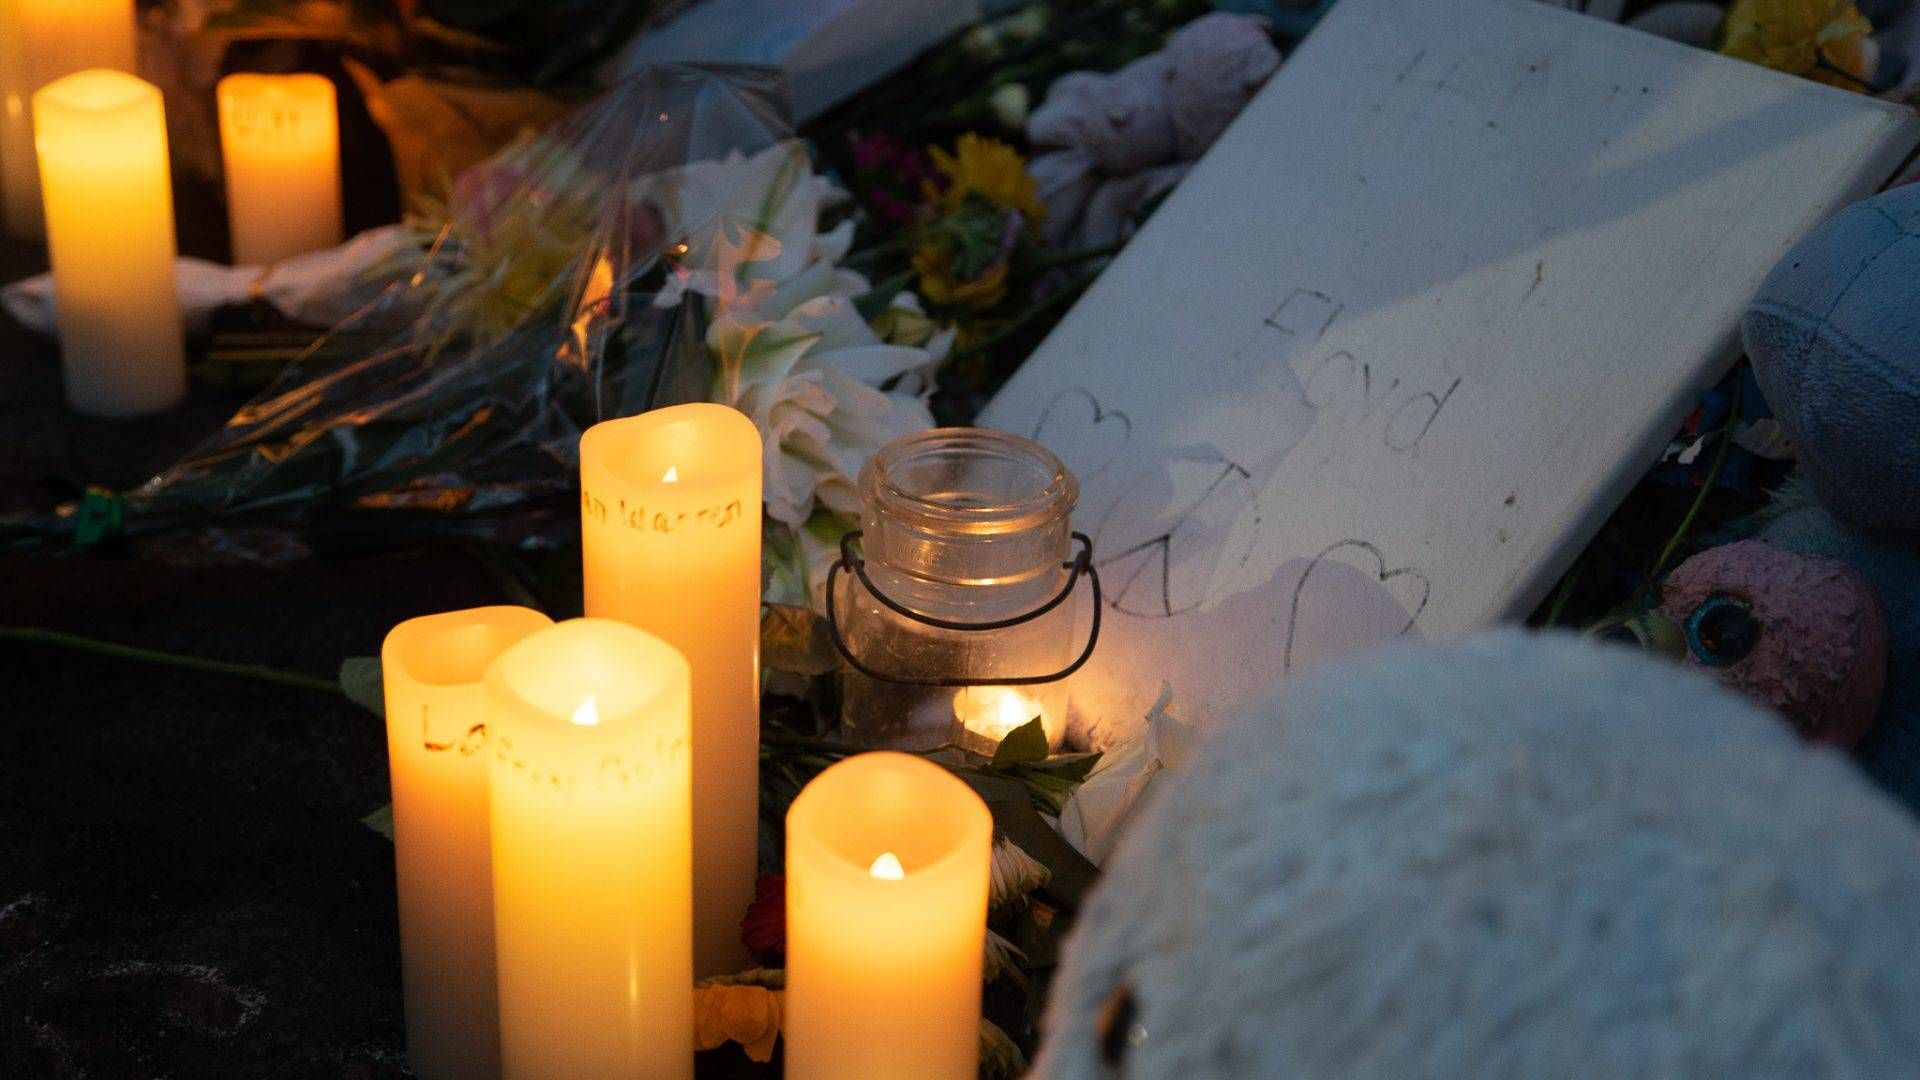 Candlelights placed near a teddy bear, flowers and a faded sign with George Floyd's name at a vigil commemorating Floyd's life